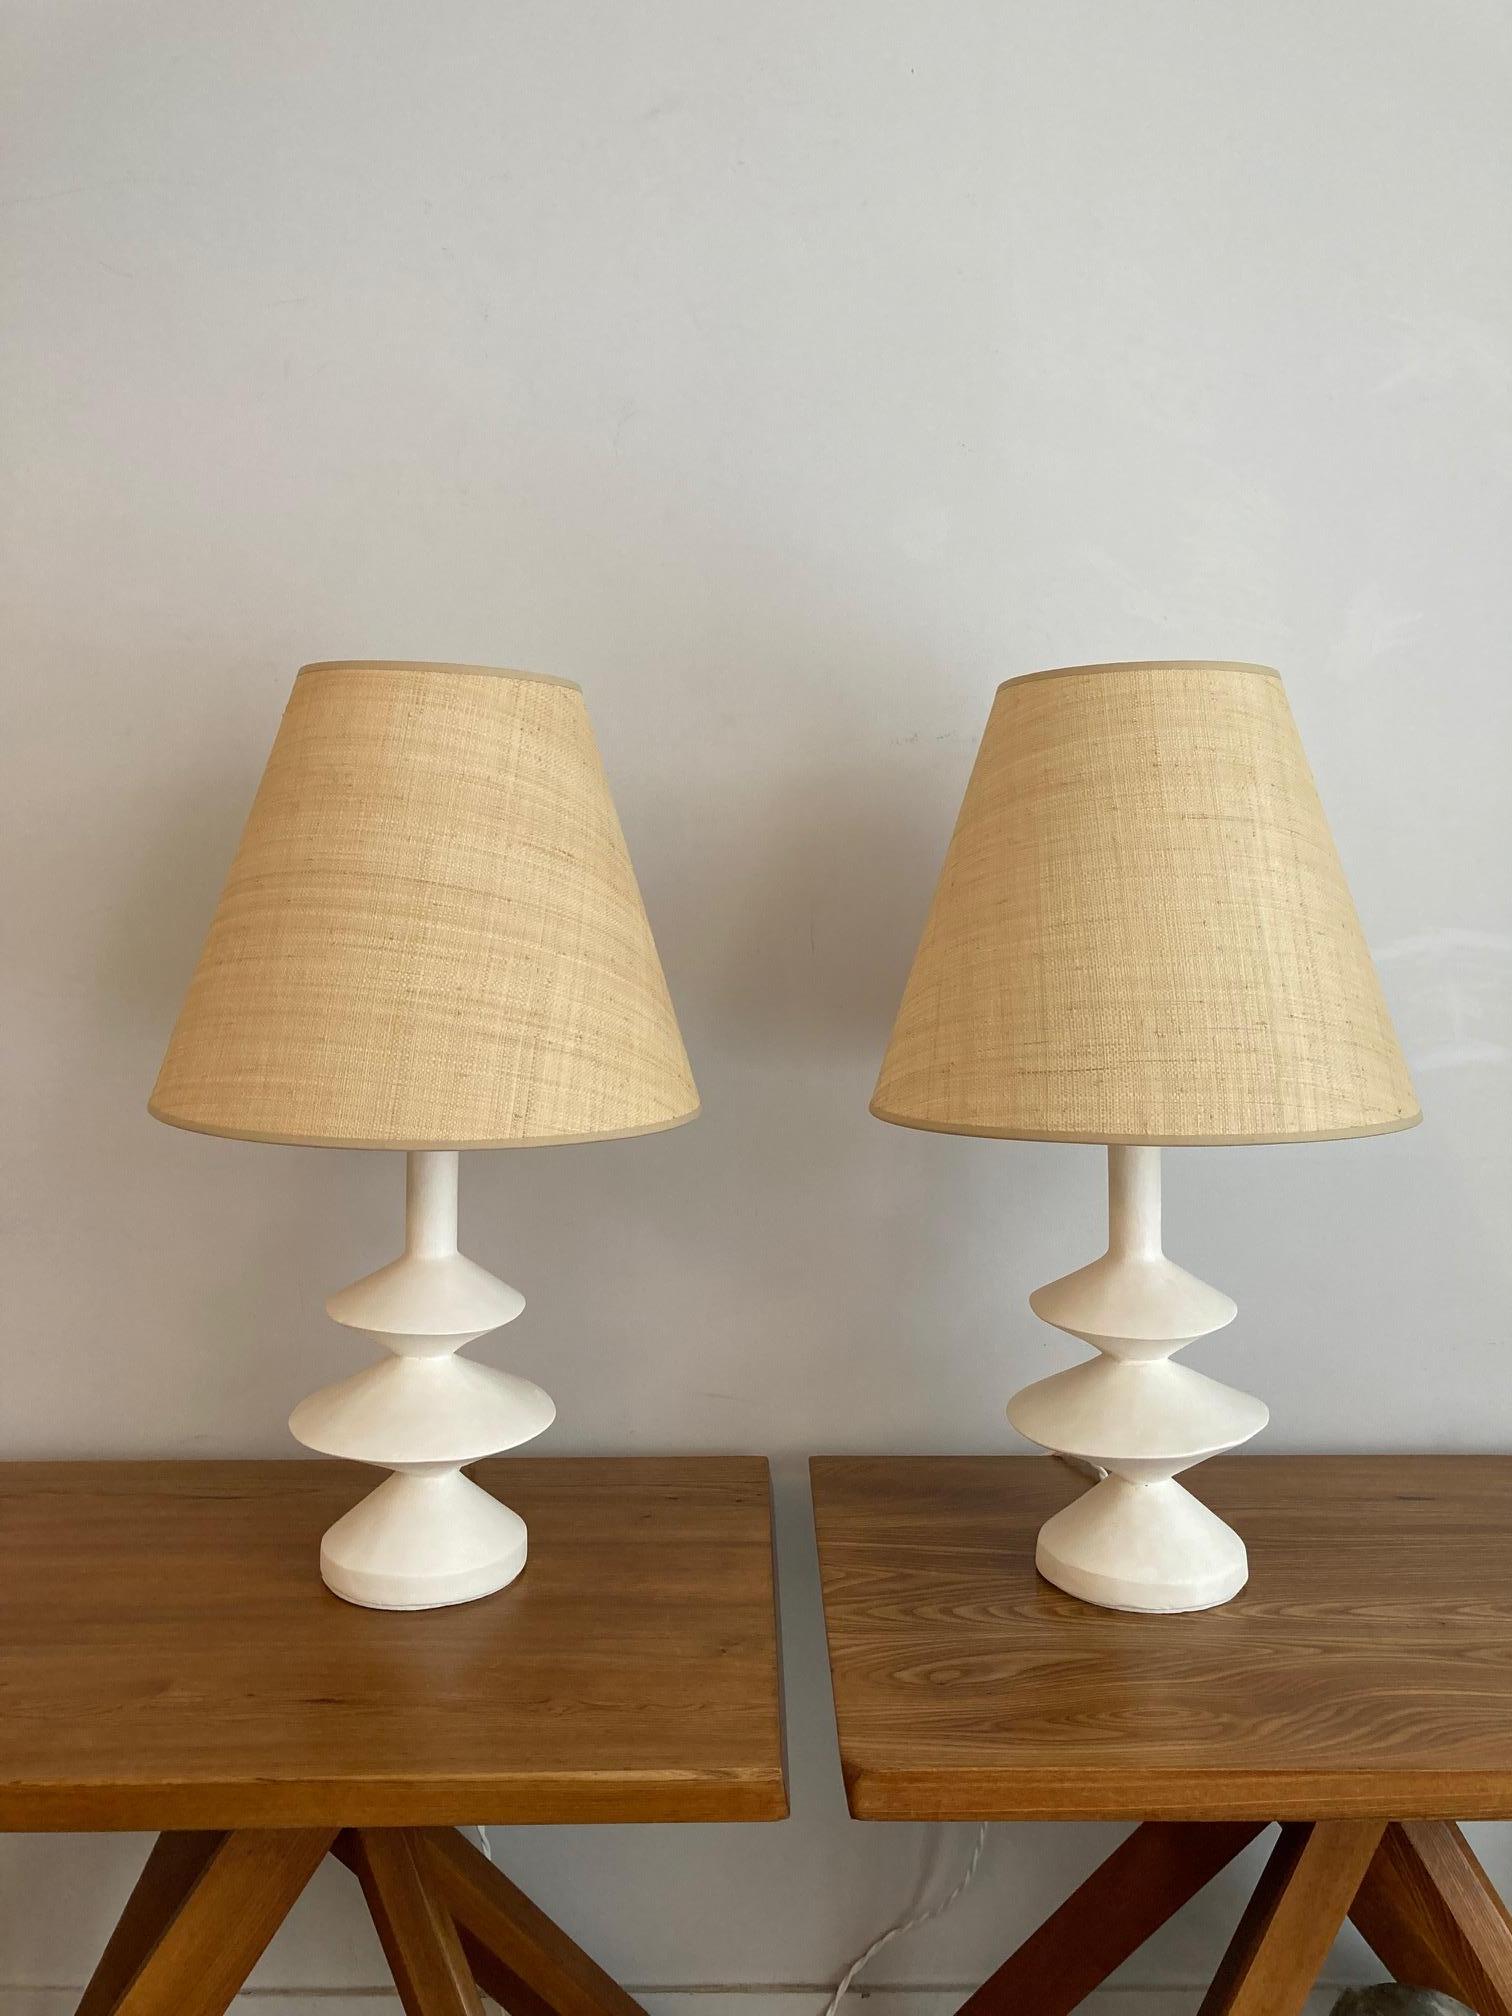 Pair of plaster lamps and custom-made raffia shades
 This production is inspired by the plaster lamp created by Giacometti for Jean-Michel Frank in the 30's.
 French decorator Jacques Grange also designed a plaster lamp inspired by the Giacometti